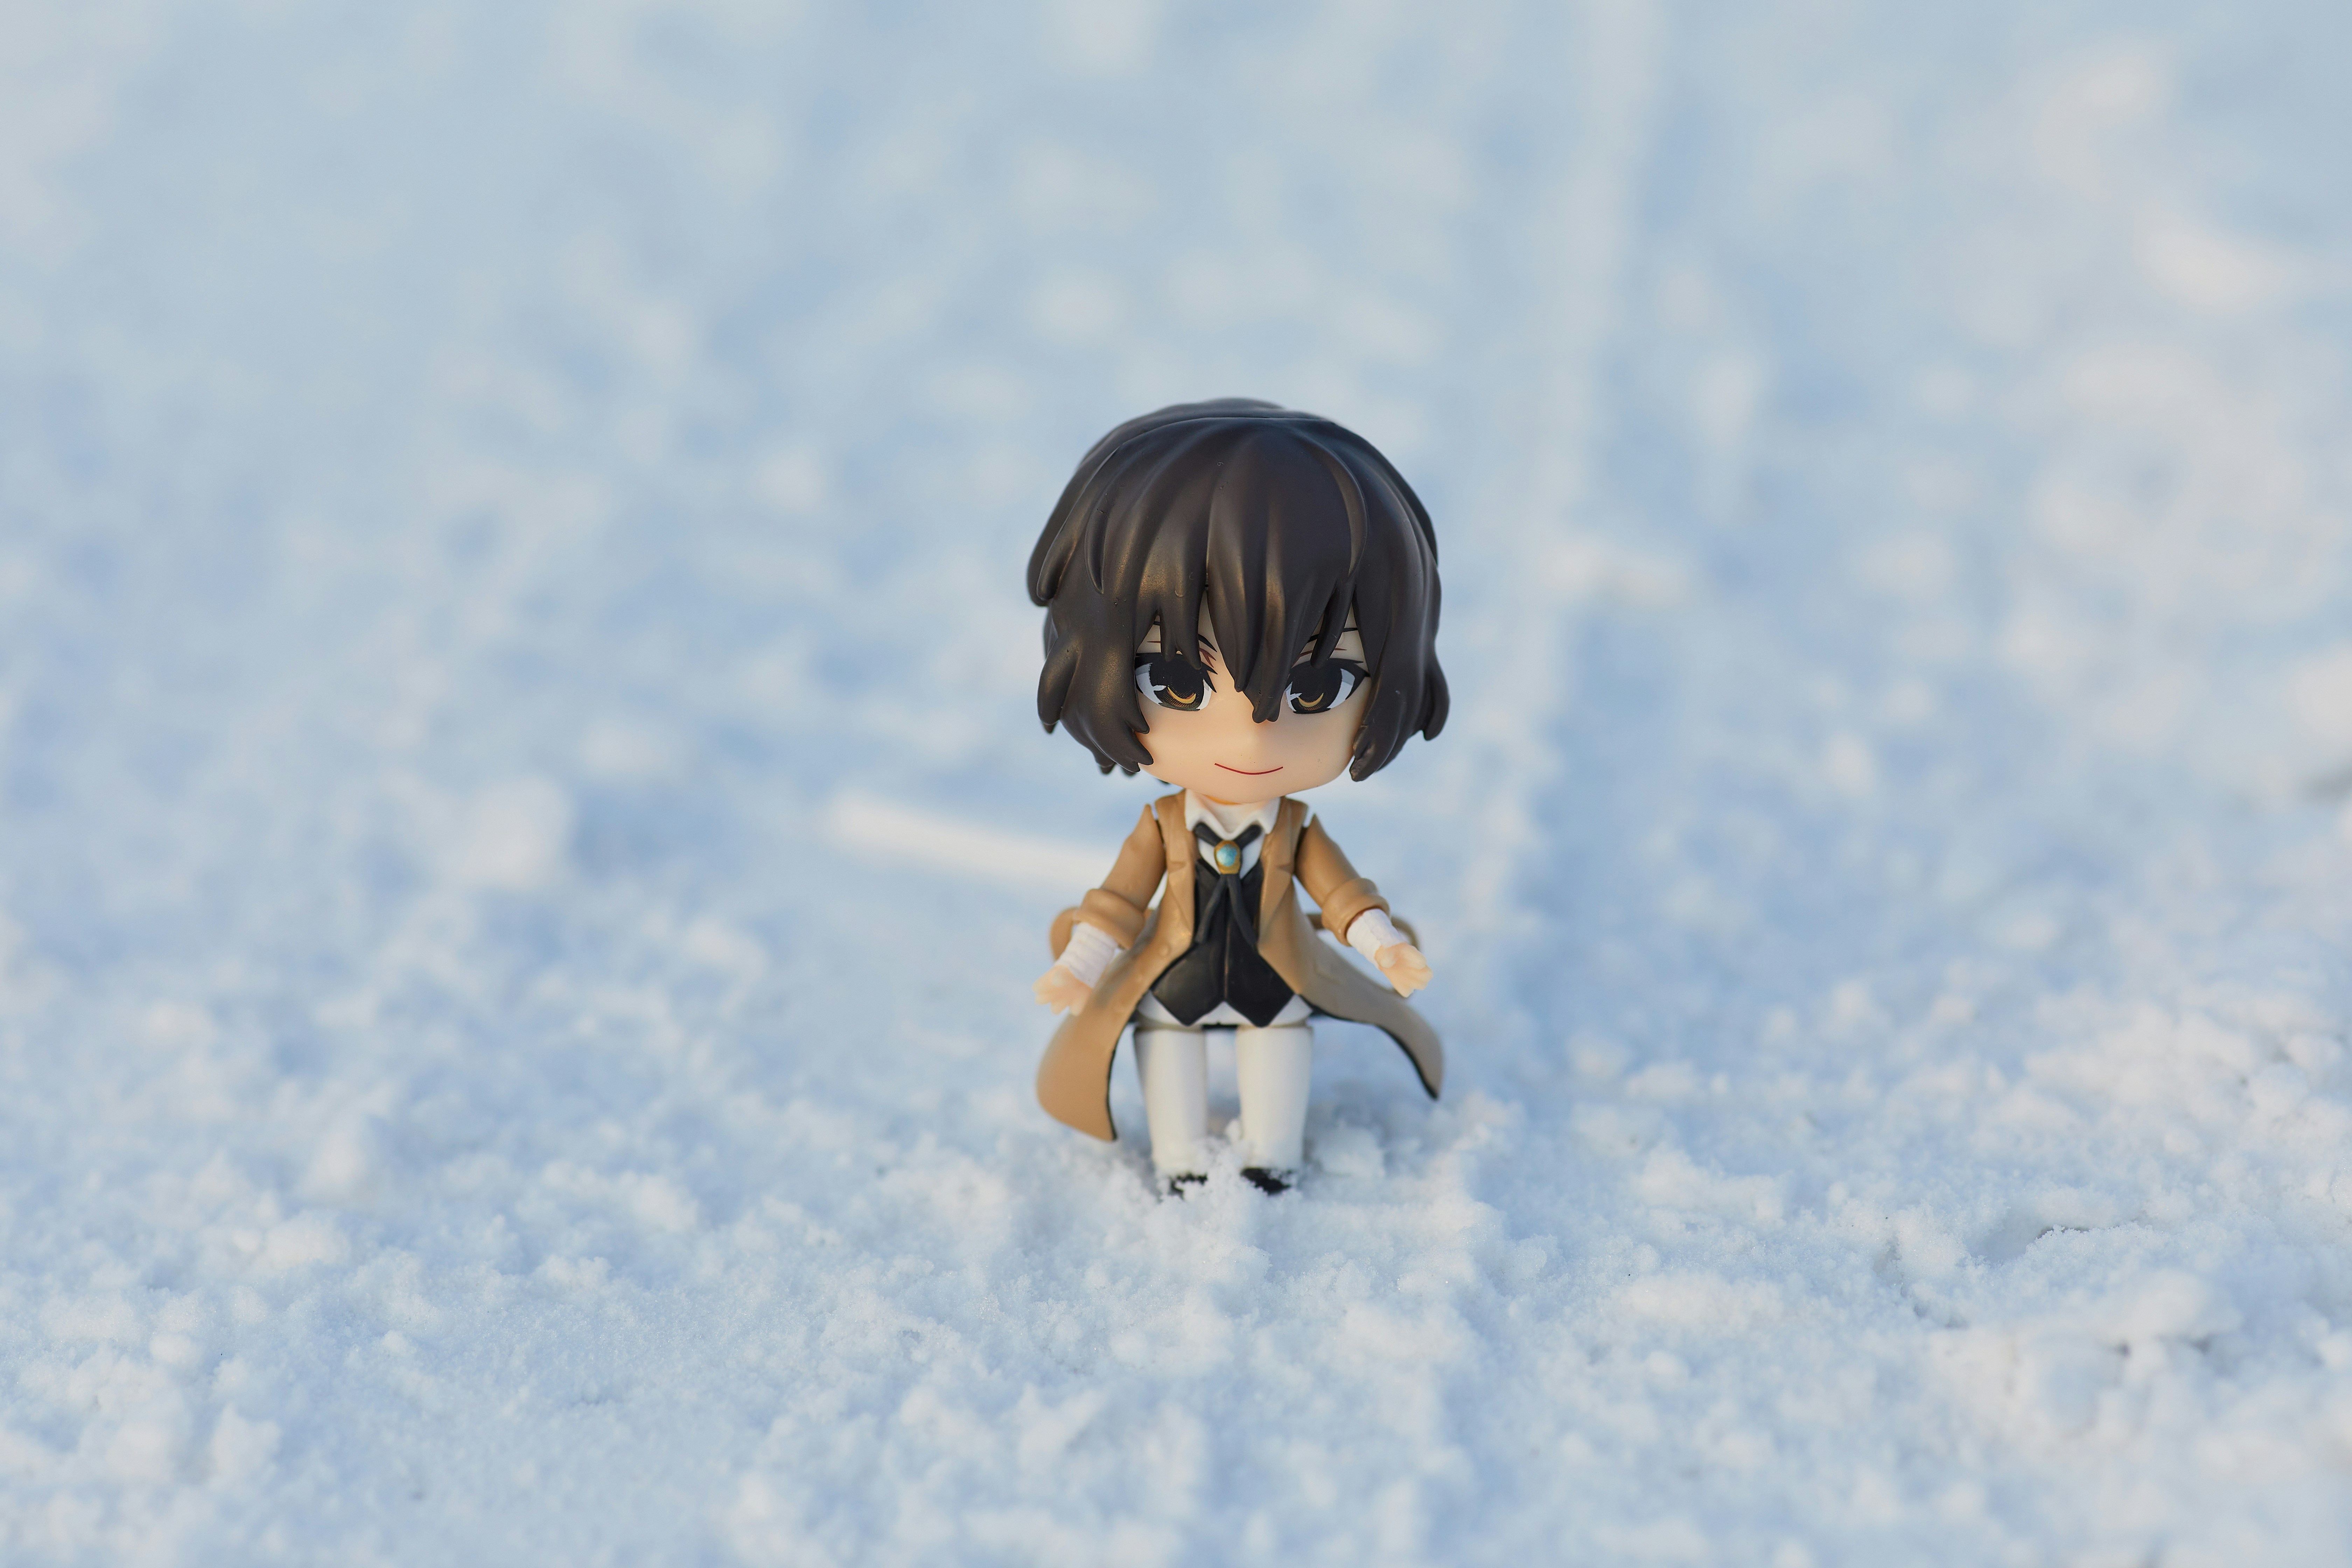 Miniature doll (Dazai) on white snow. Stylish anime doll background for website and design